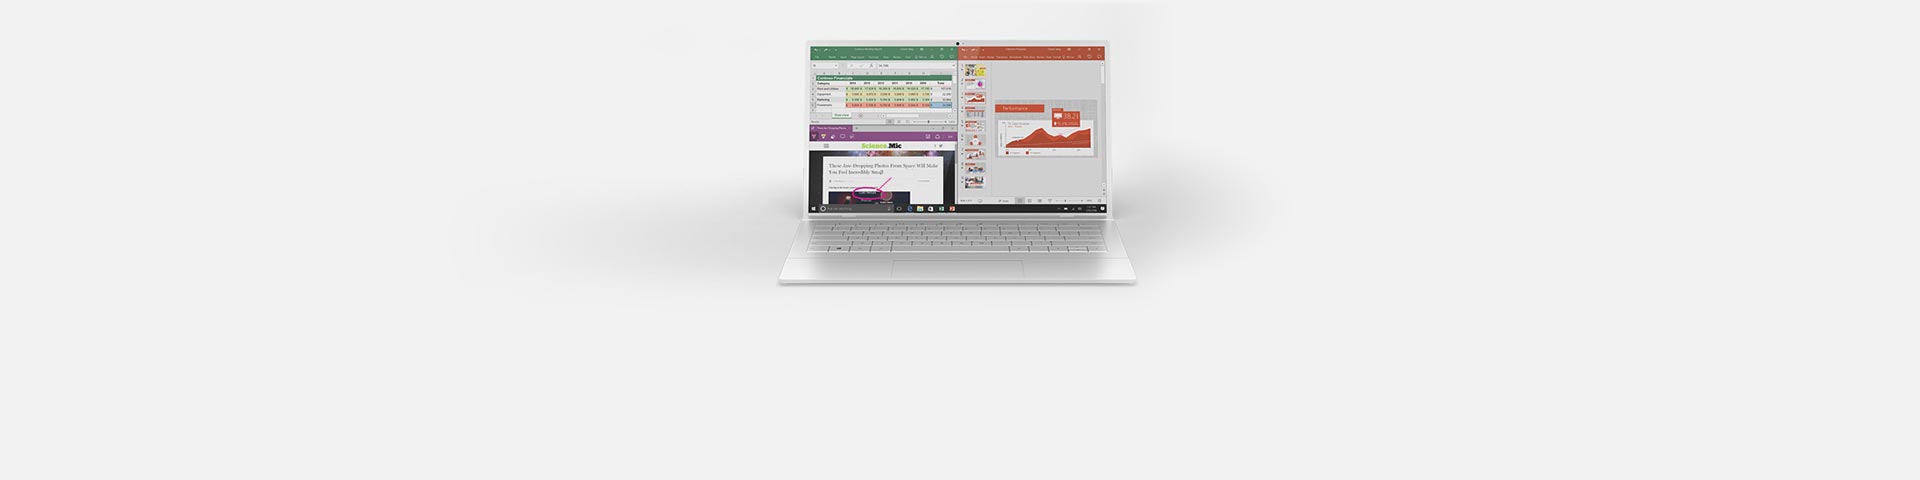 A laptop with Office apps on the screen